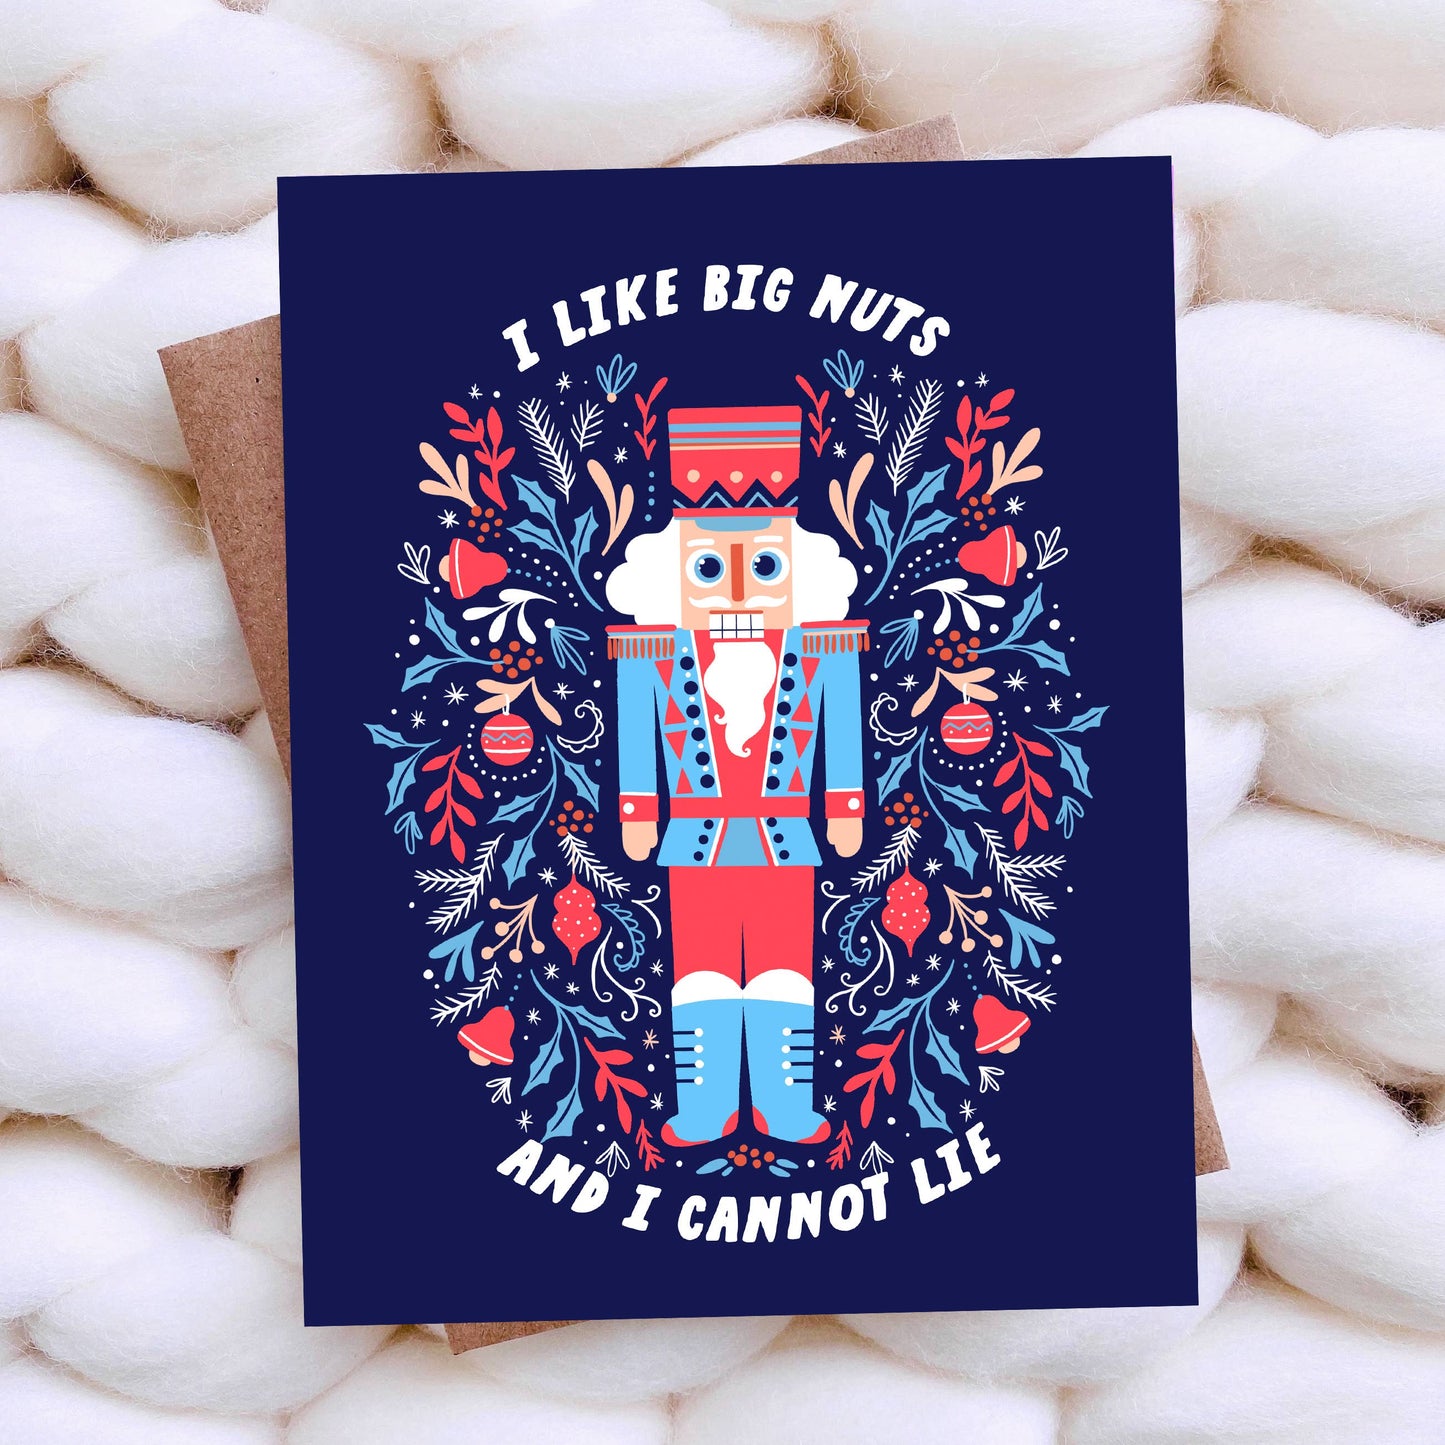 Big Nuts Funny Christmas Card - Pop Culture Holiday Card